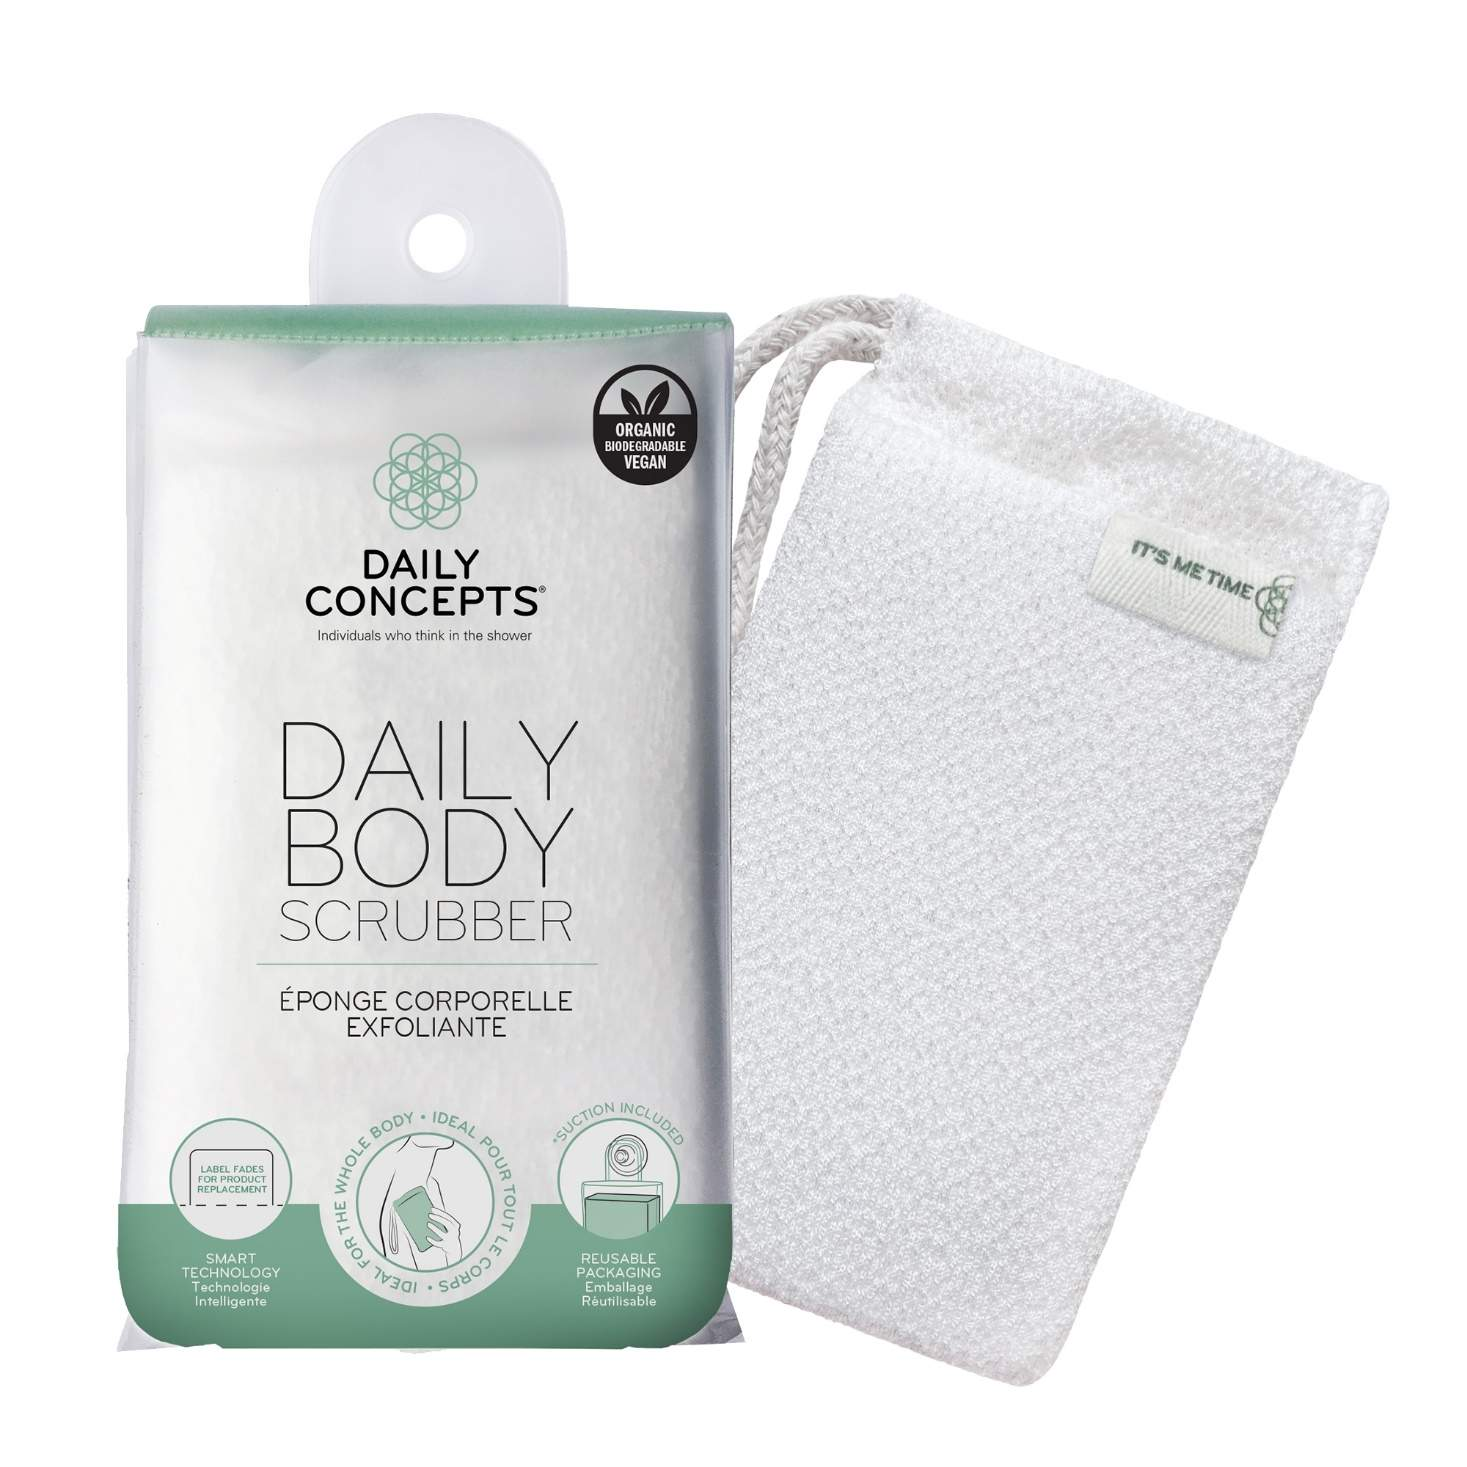 Daily Concepts Your Body Scrubber Daily Concepts Your Body Scrubber 1